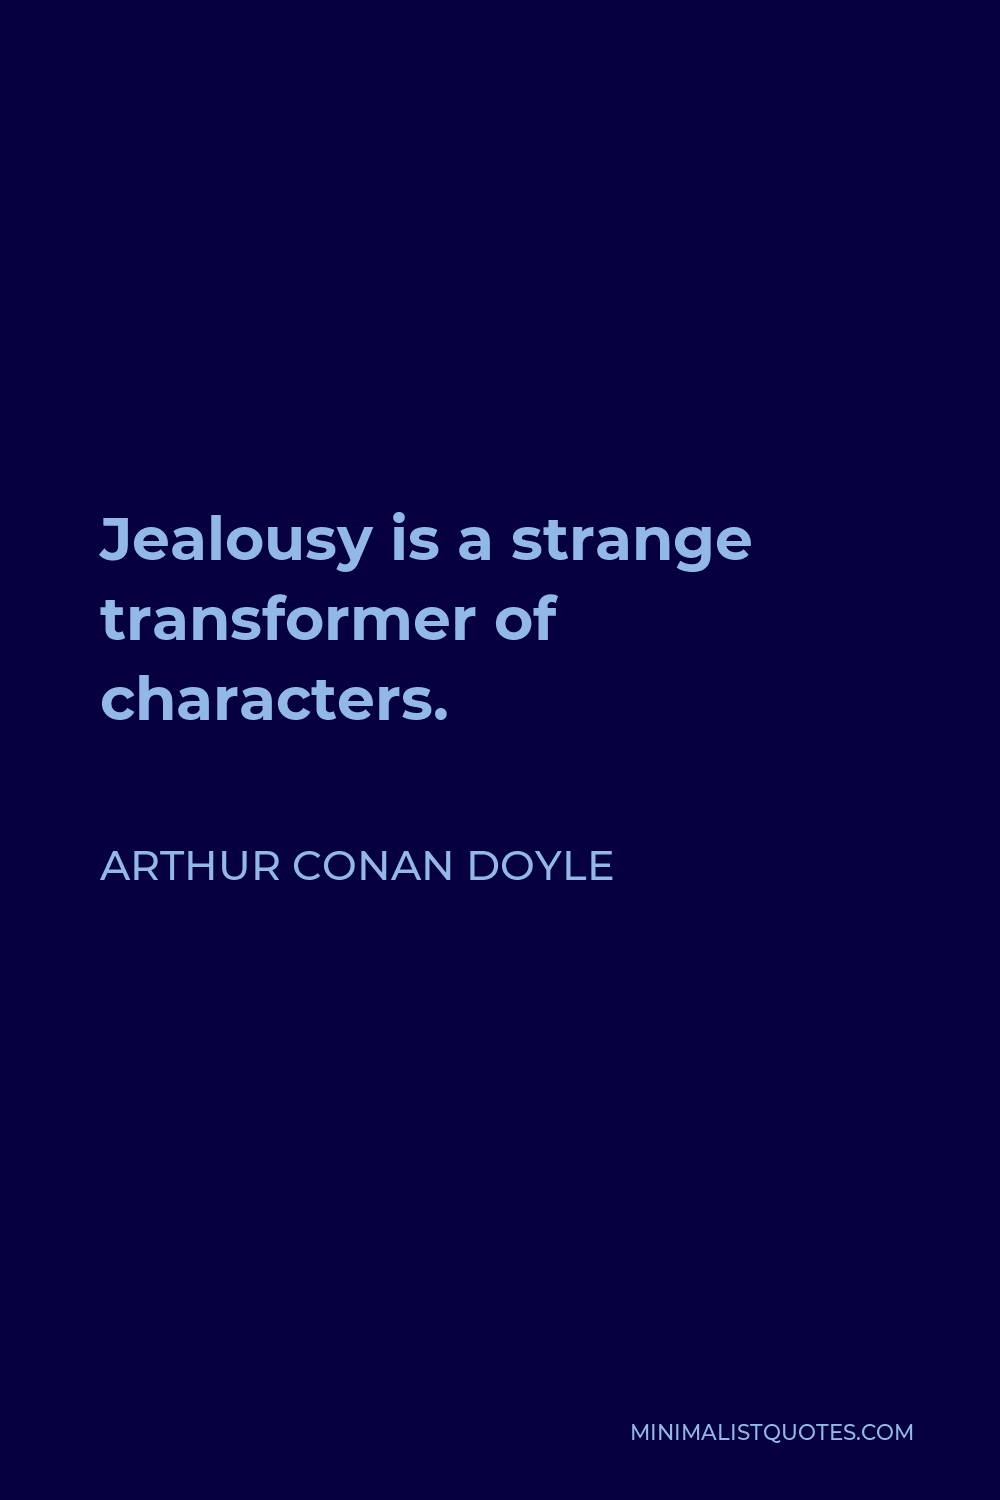 Arthur Conan Doyle Quote - Jealousy is a strange transformer of characters.